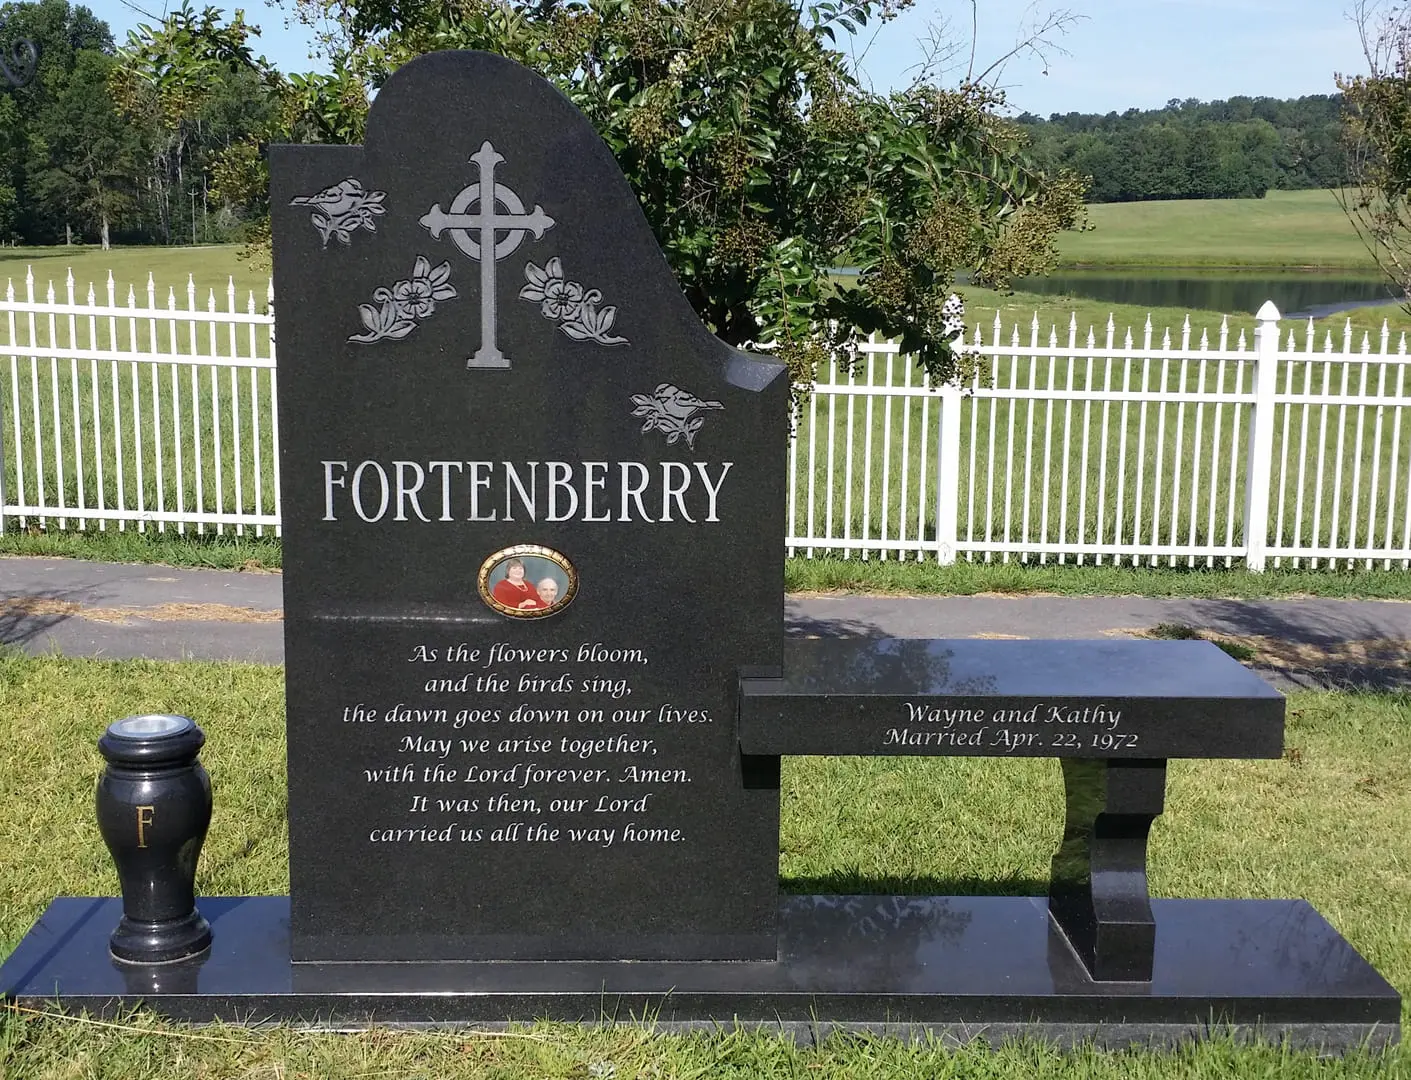 A memorial slab with the name of Fortenberry